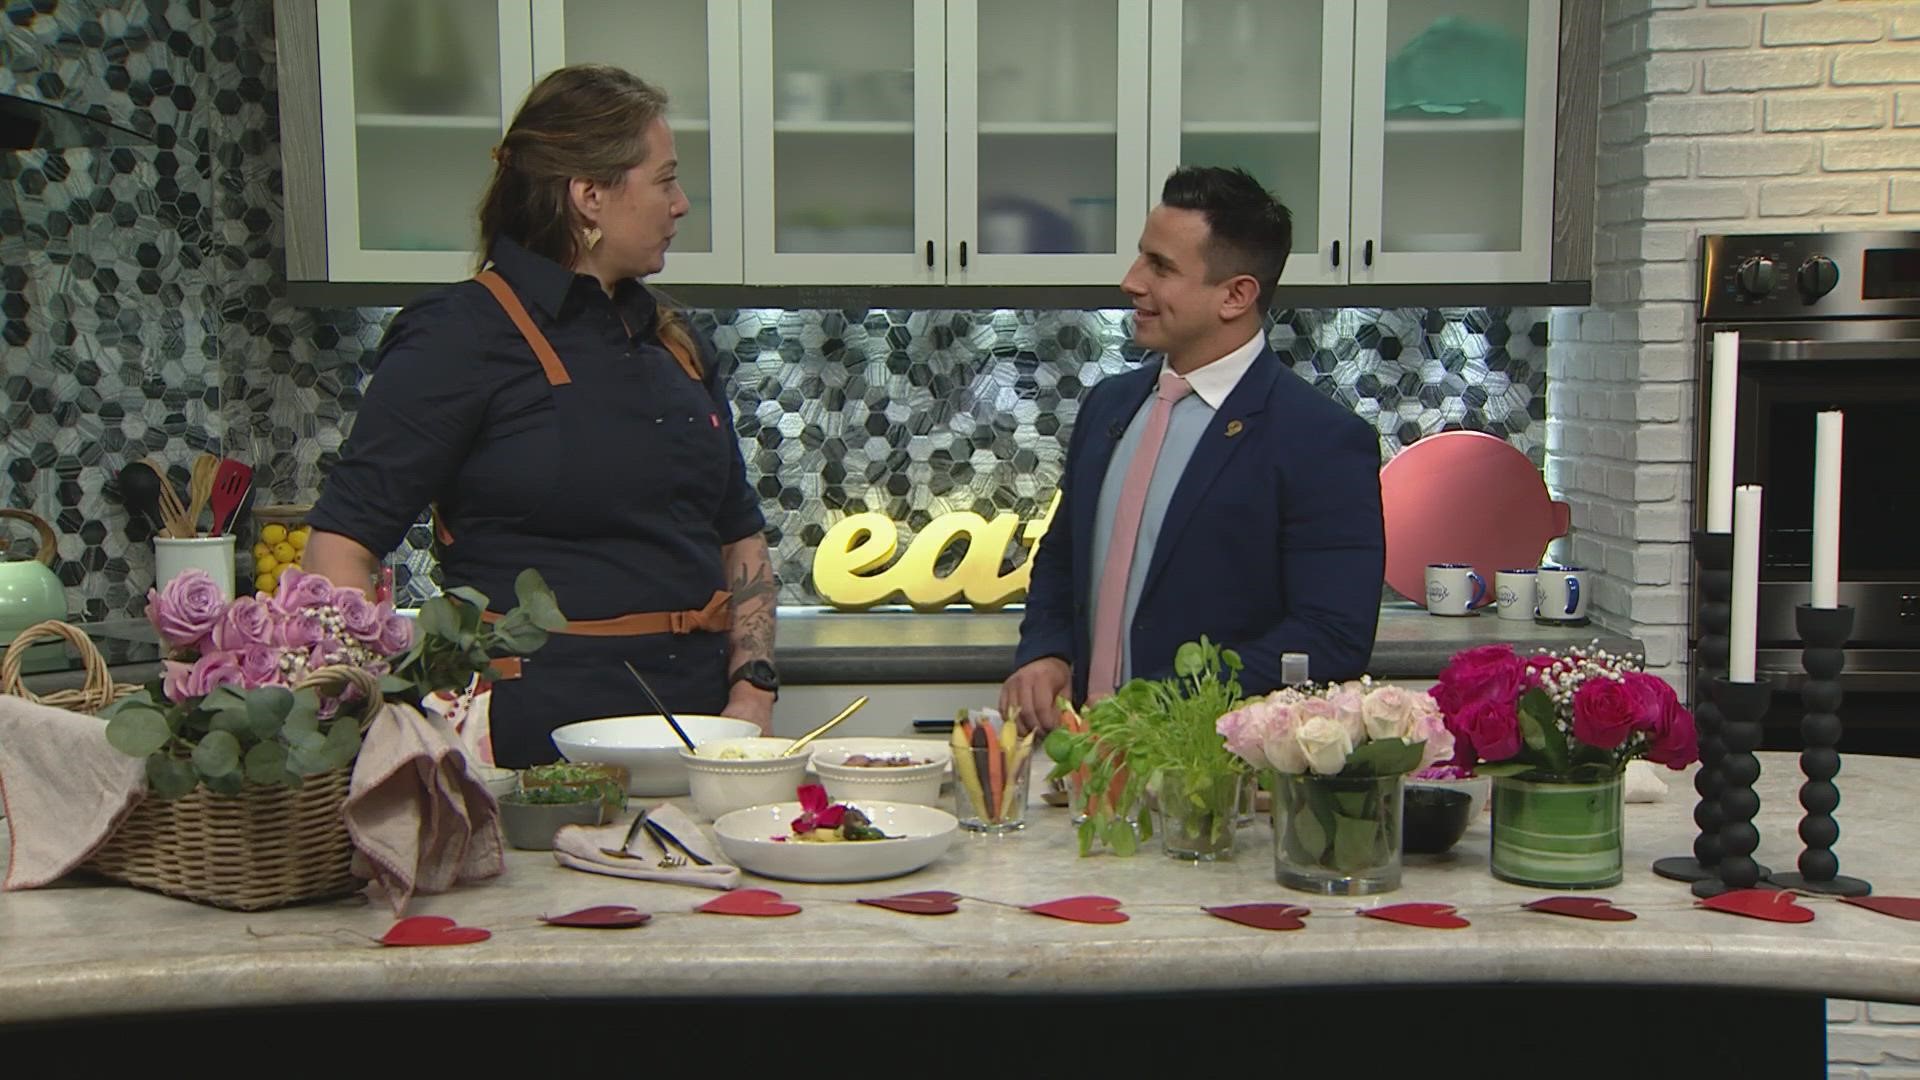 Who says Valentine's Day has to break the bank? Local chef Andrea from Süti & Co. has simple ways to spruce up dinner.